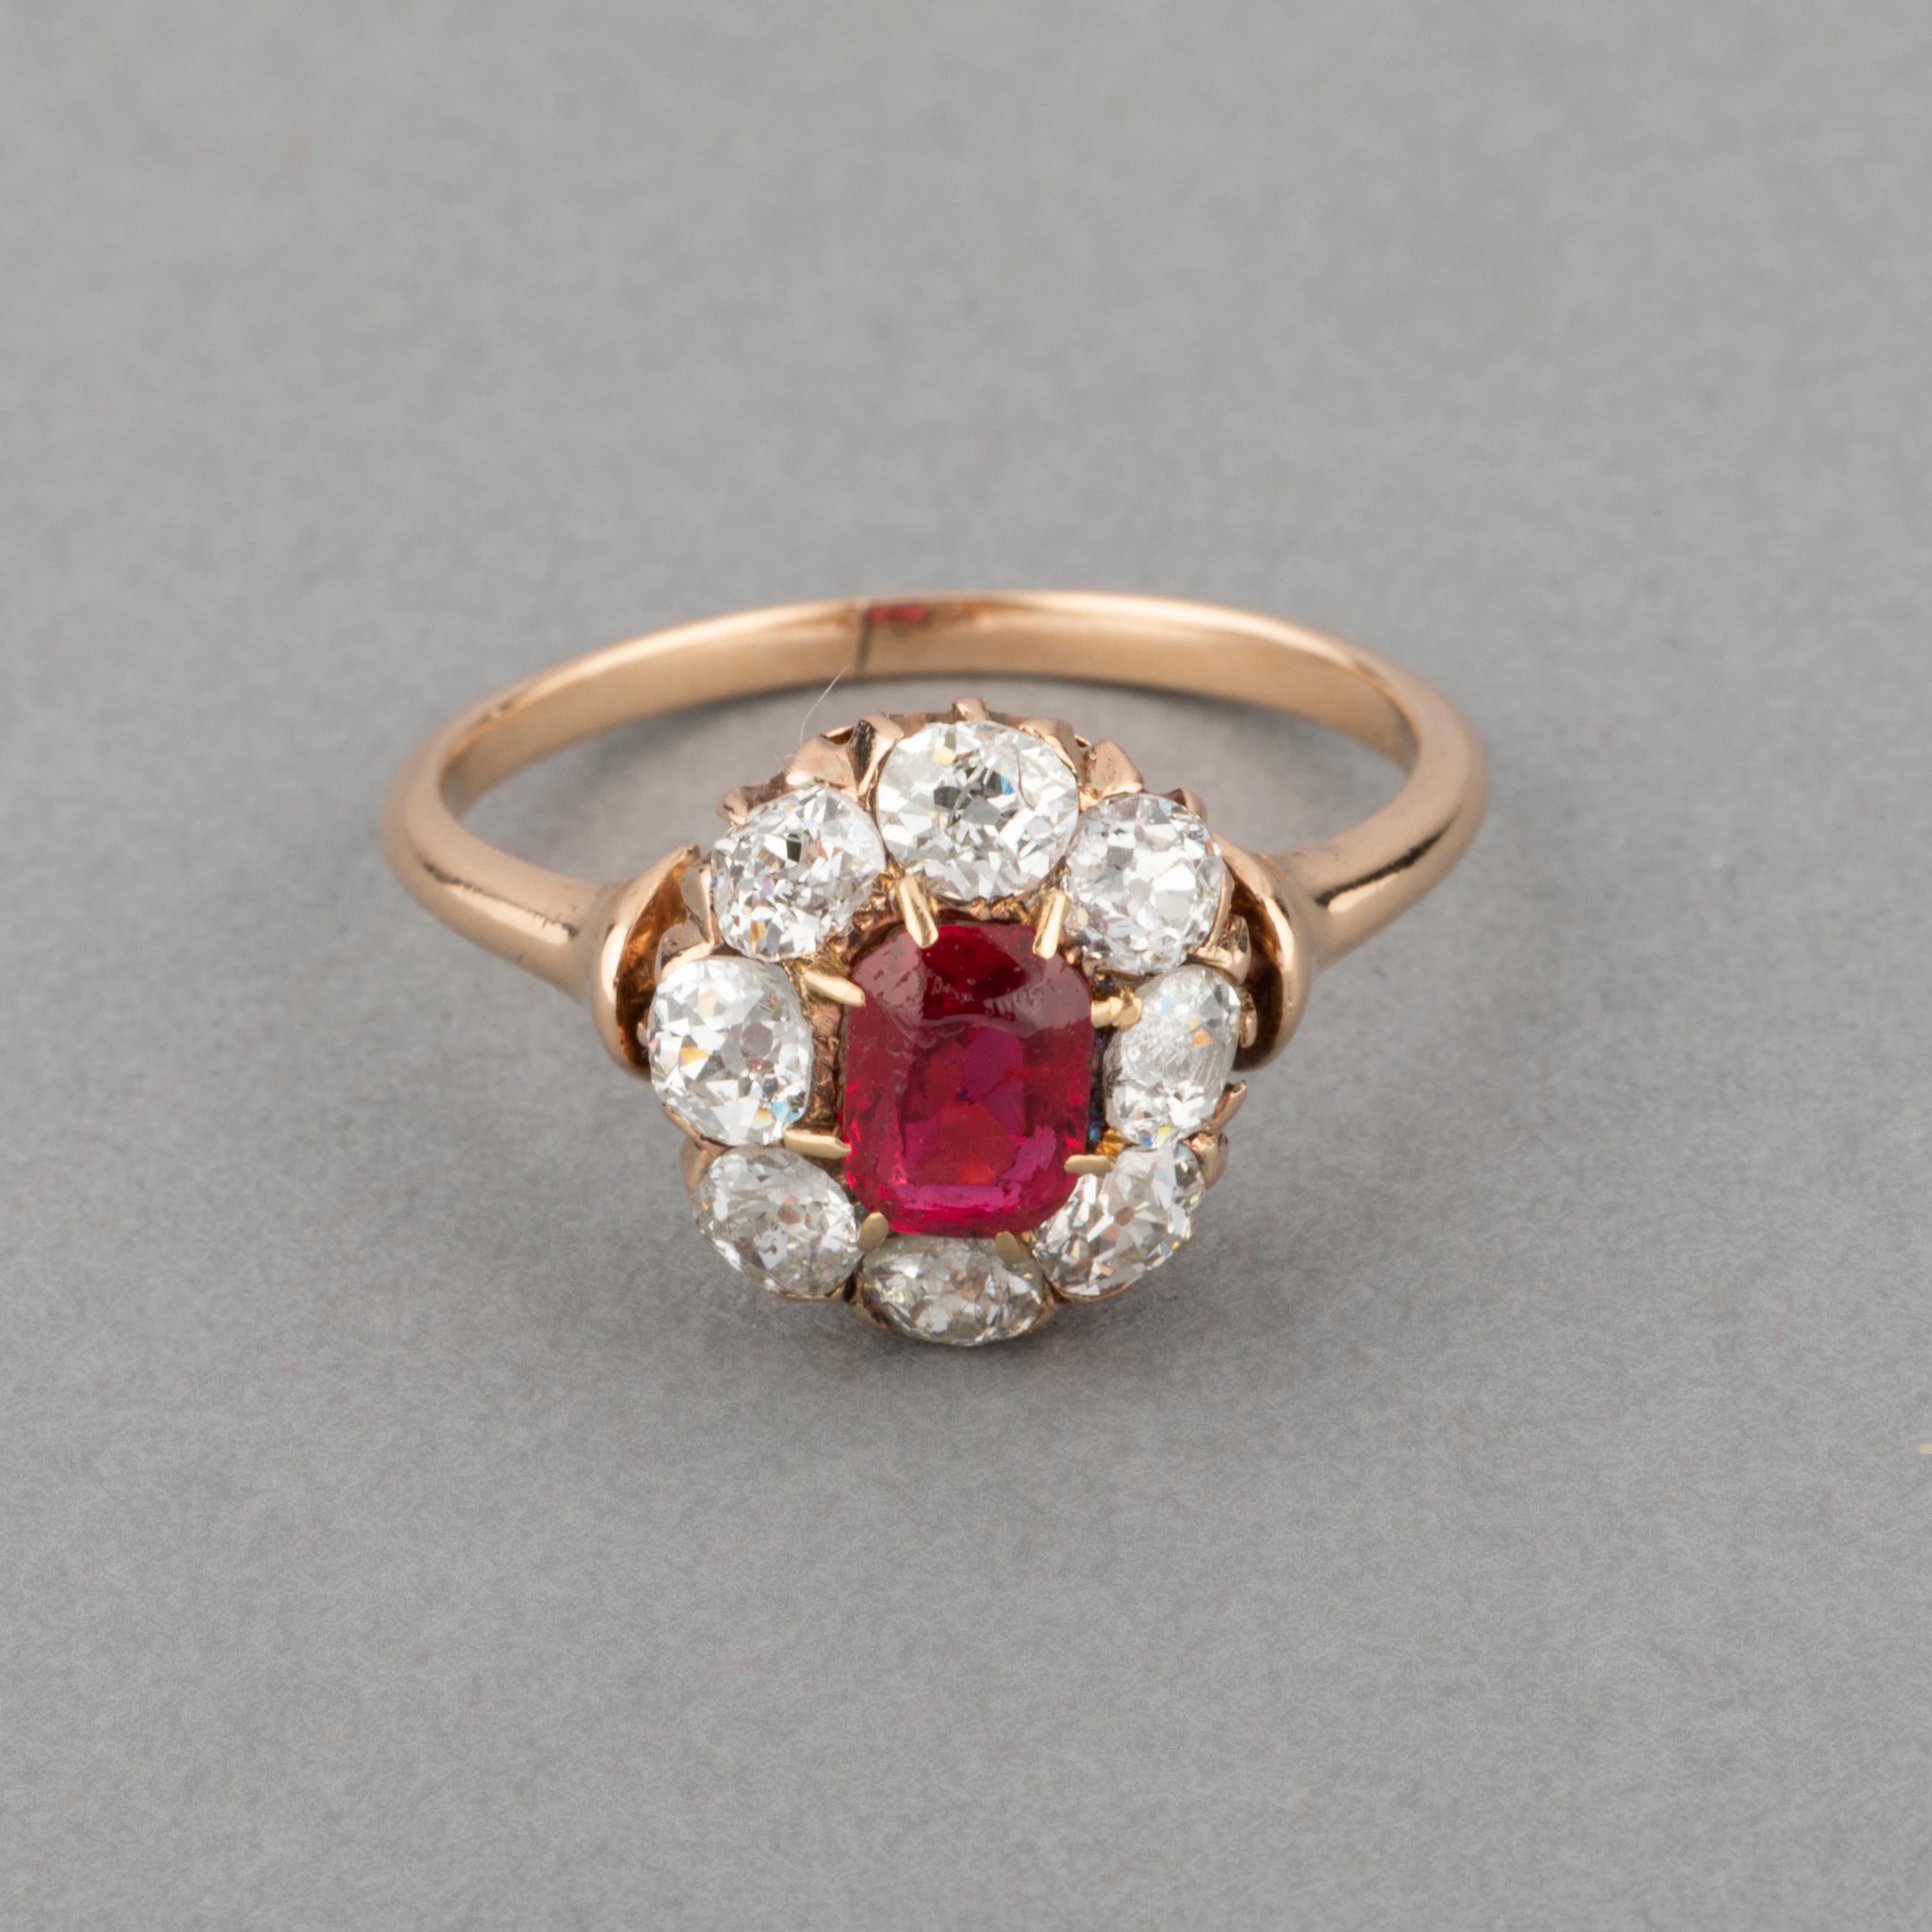 A very lovely retro ring. Made in rose gold 18K
Set wit approximately 0.90 carats diamonds and a ruby of 0.80 Carats.

Ring size: 53 or 6.30 USA.

Weight: 2.70 grams